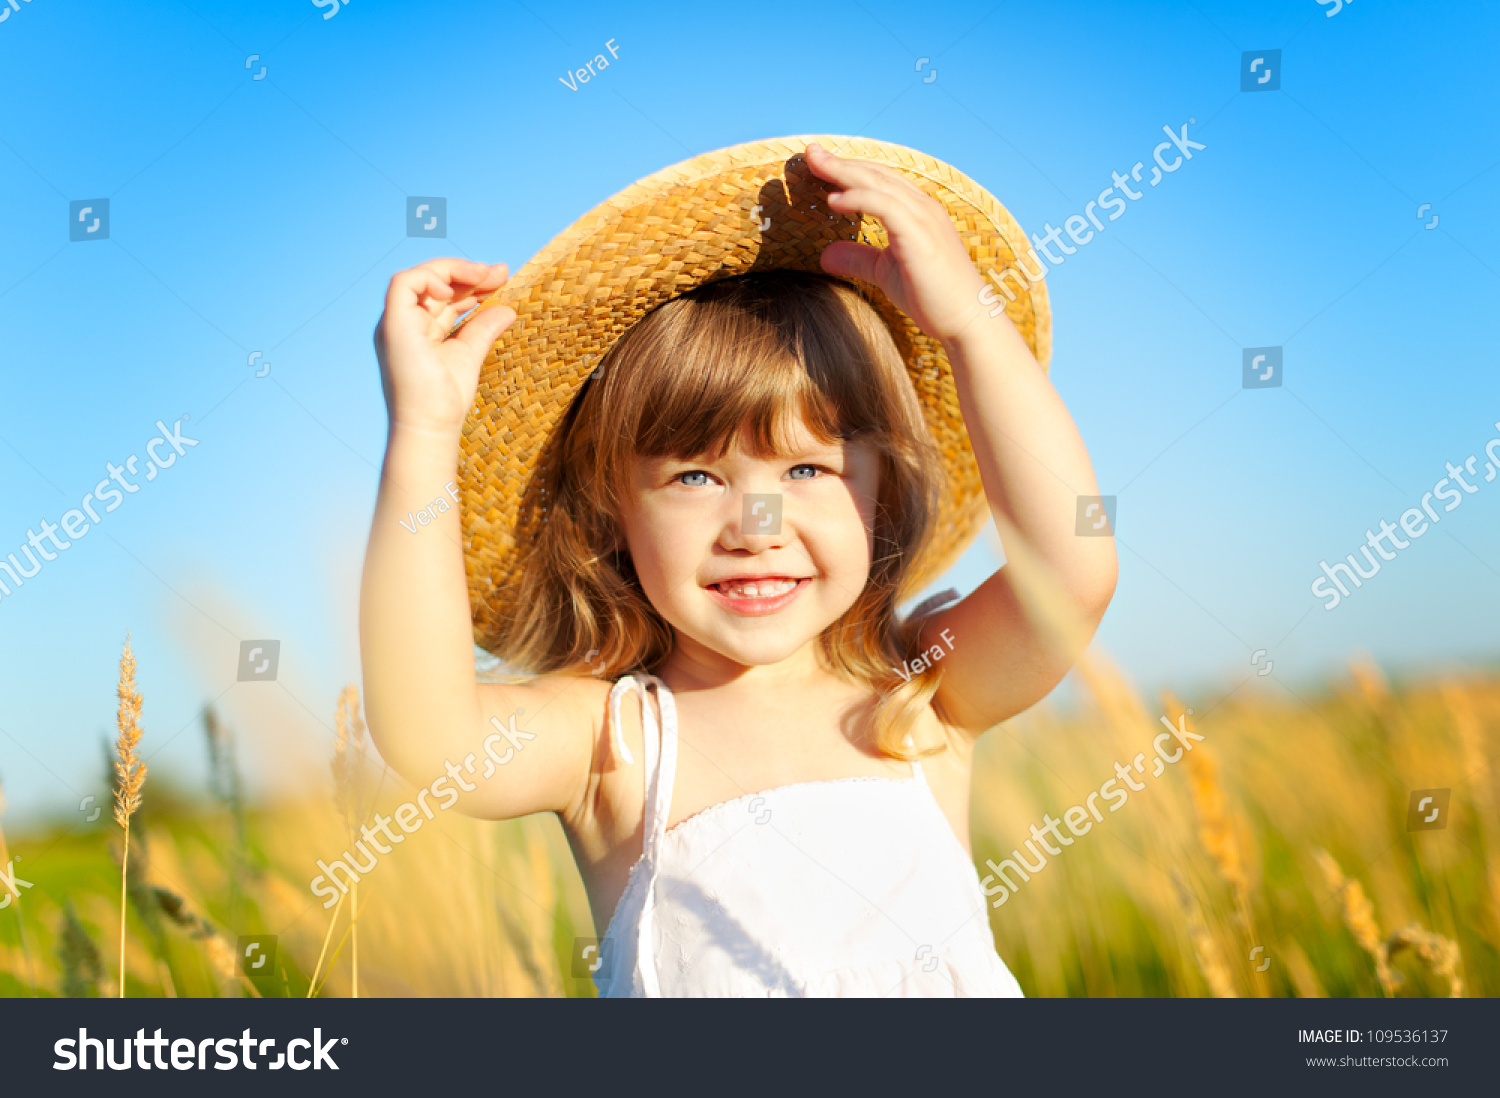 Beautiful little girl on the meadow in summer day #109536137